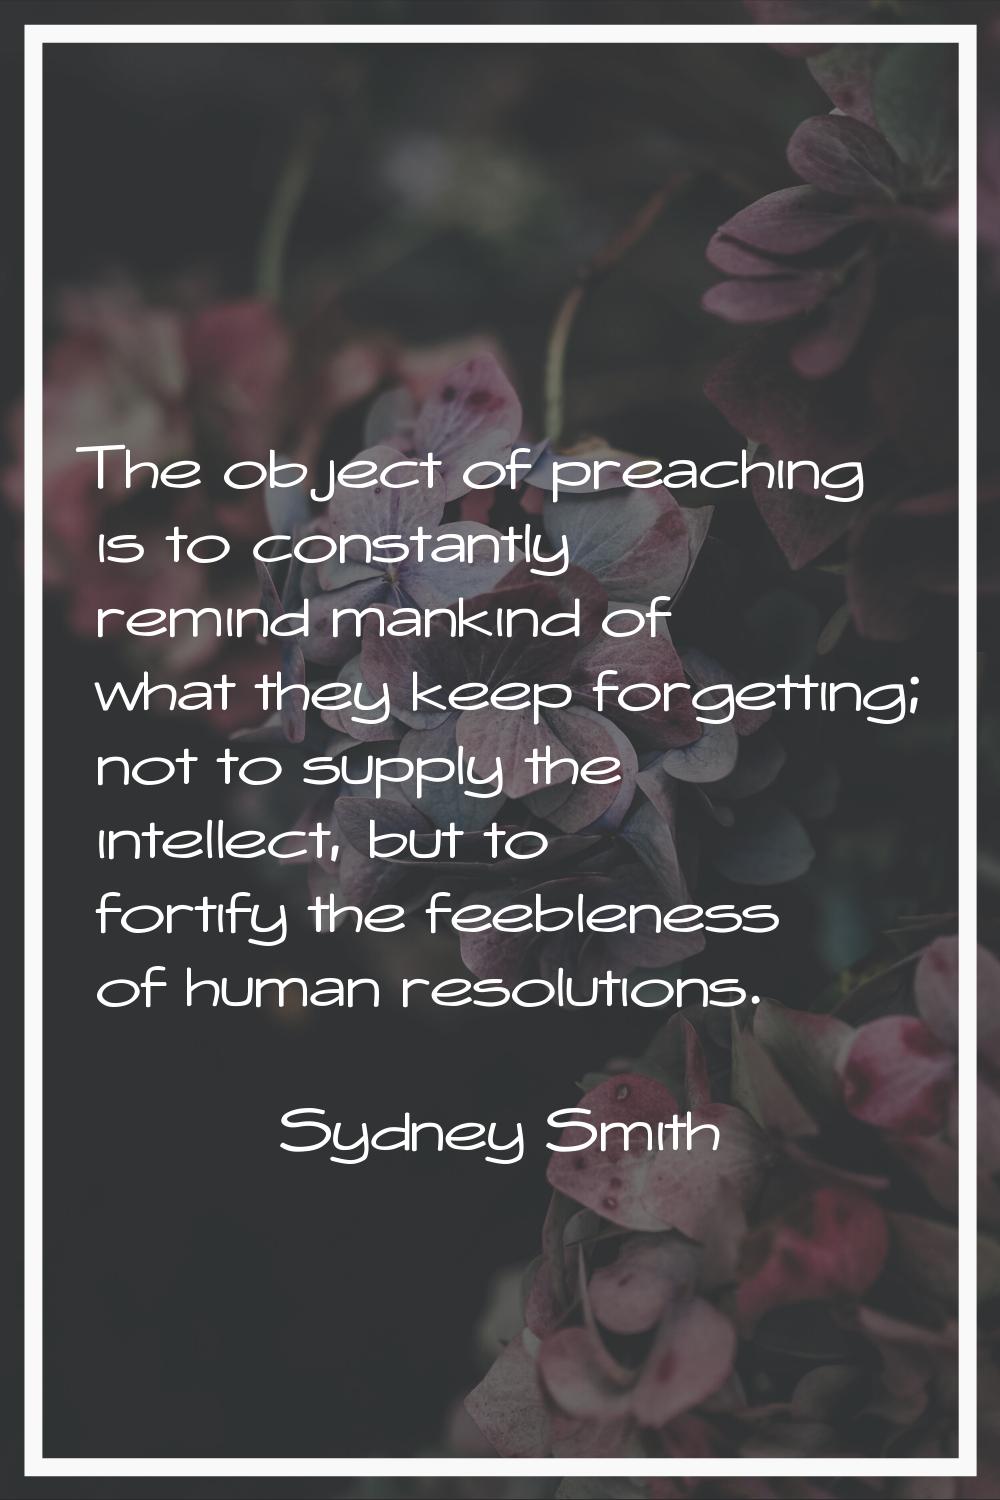 The object of preaching is to constantly remind mankind of what they keep forgetting; not to supply